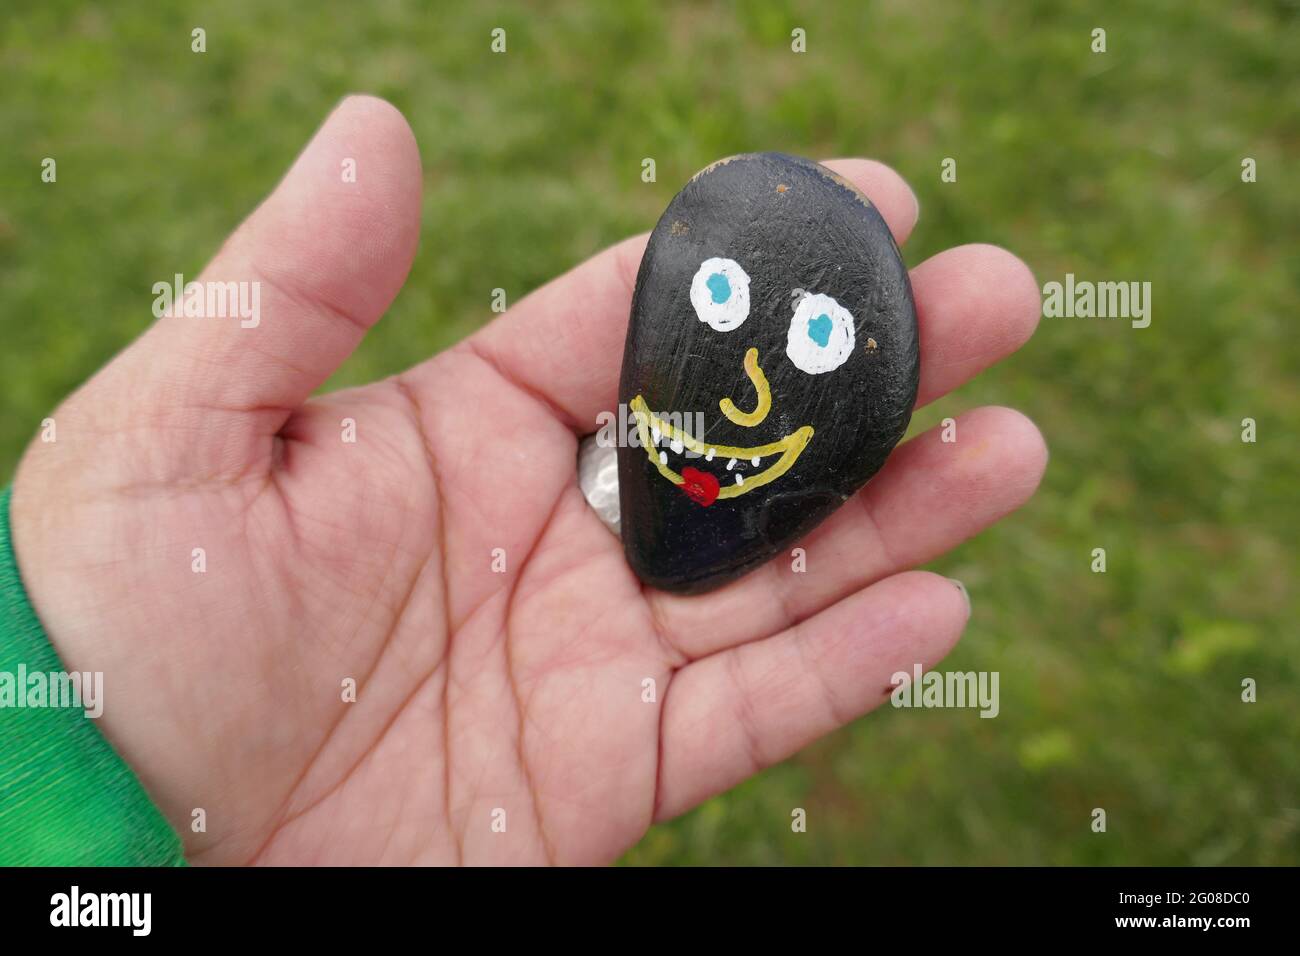 Silly funny face painted on kindness rock held in woman's hand Stock Photo